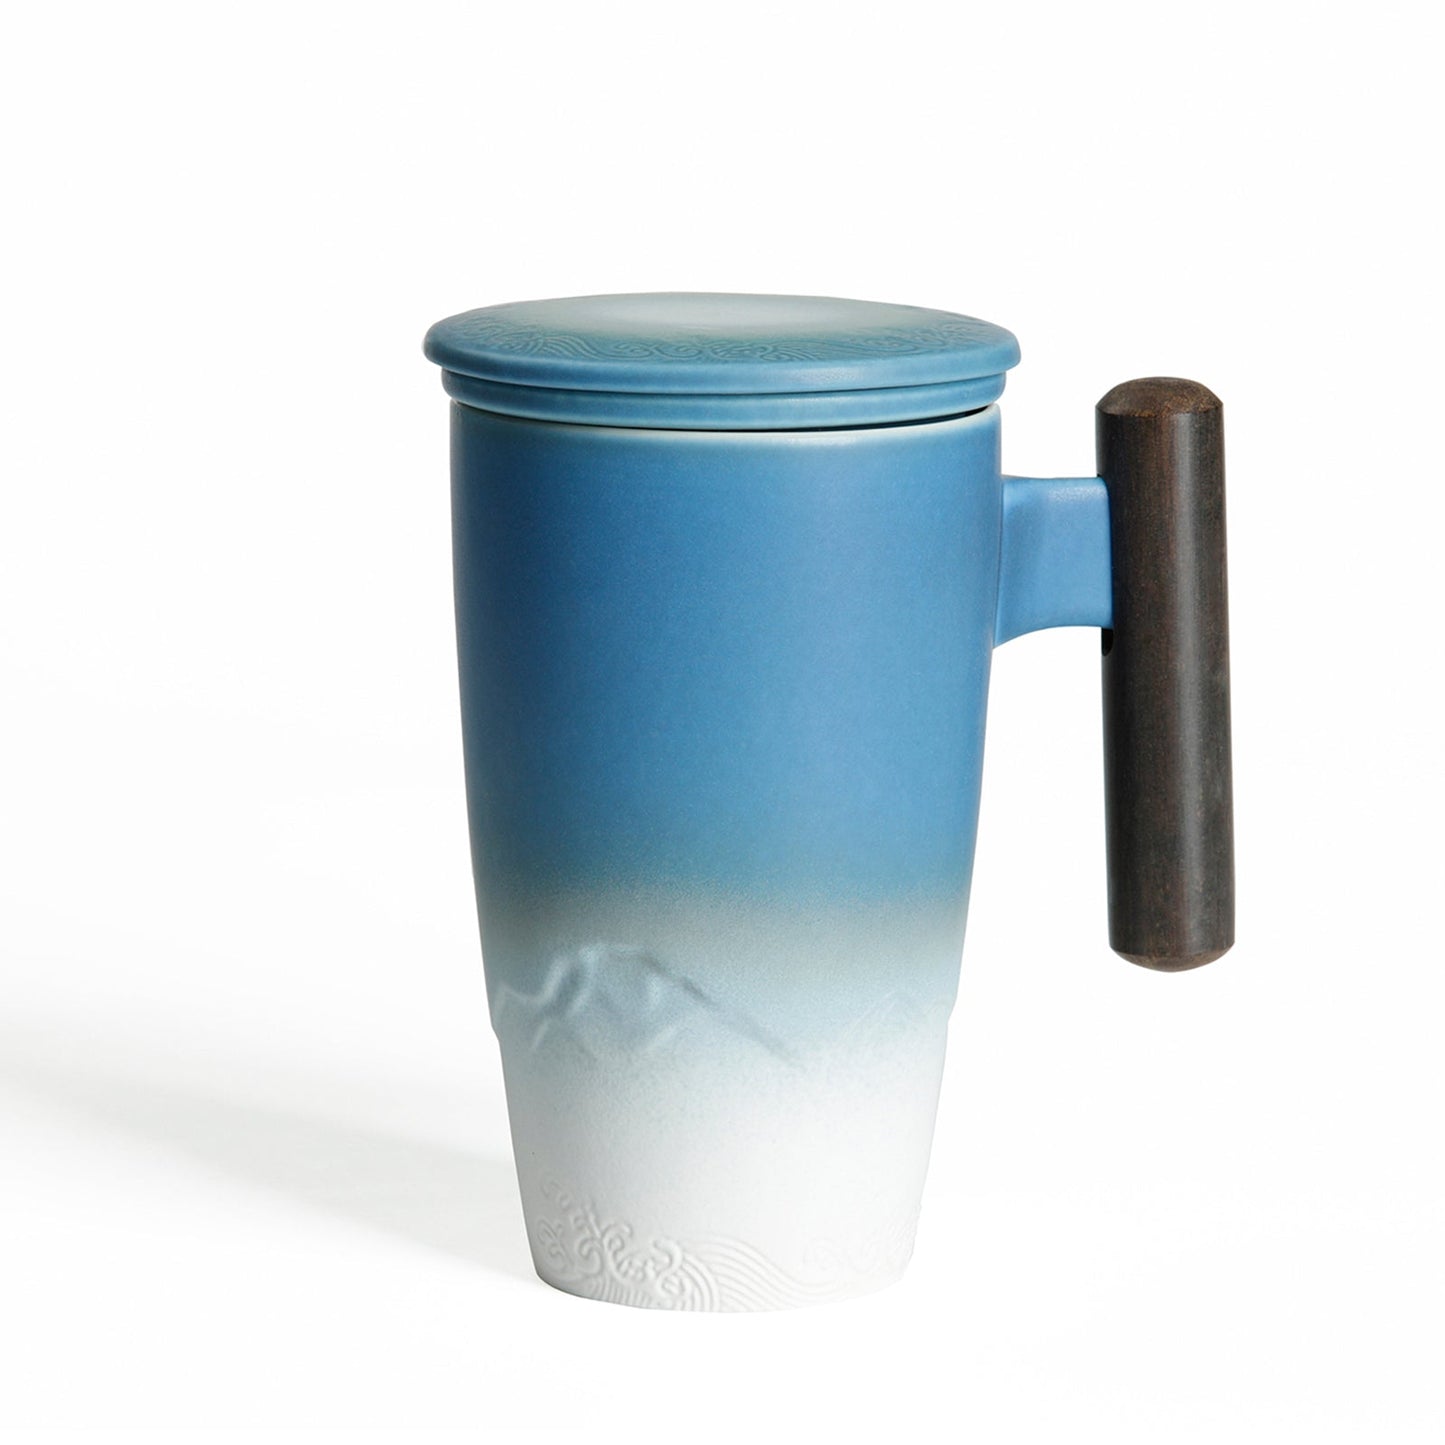 Lofty Mountains and Flowing Water Infusion Mug